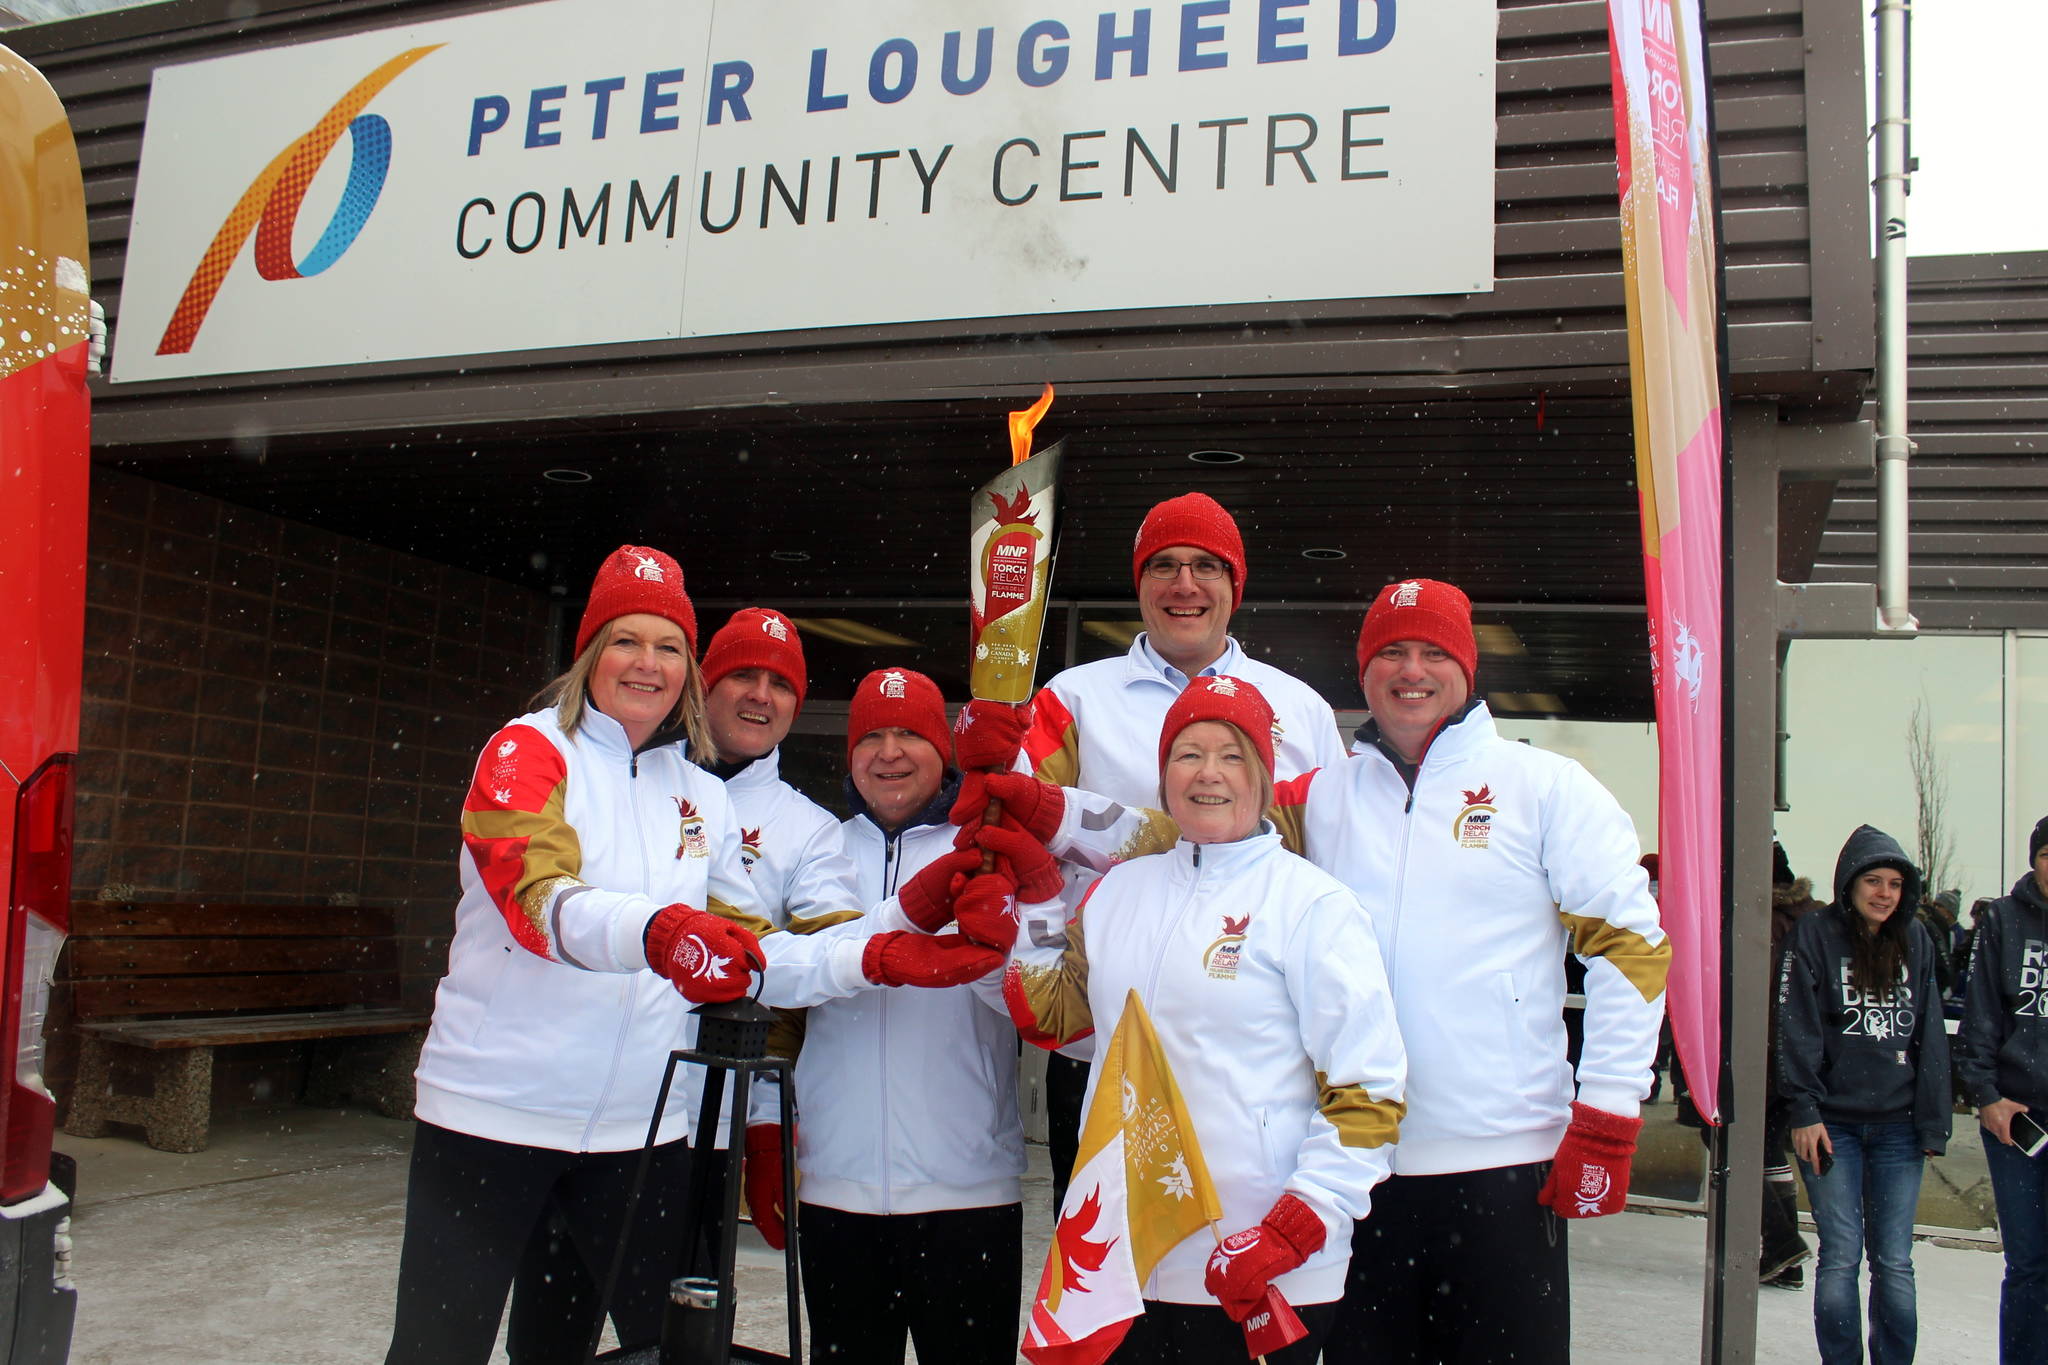 Great day for torch run despite blustery weather